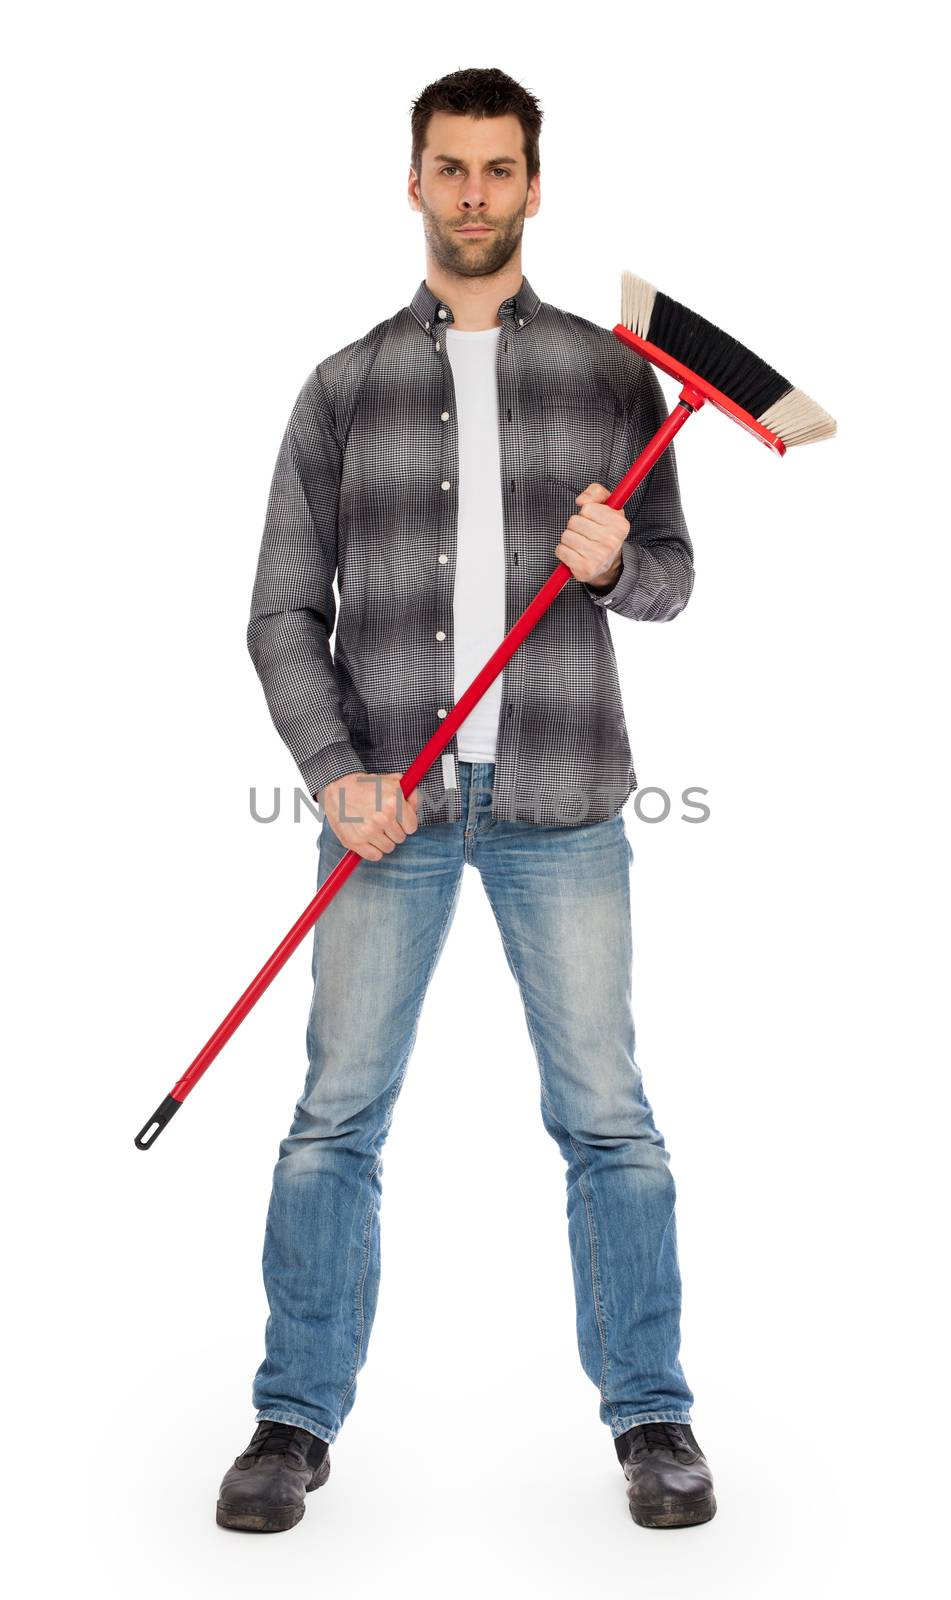 Full isolated studio picture from a young worker with a broom